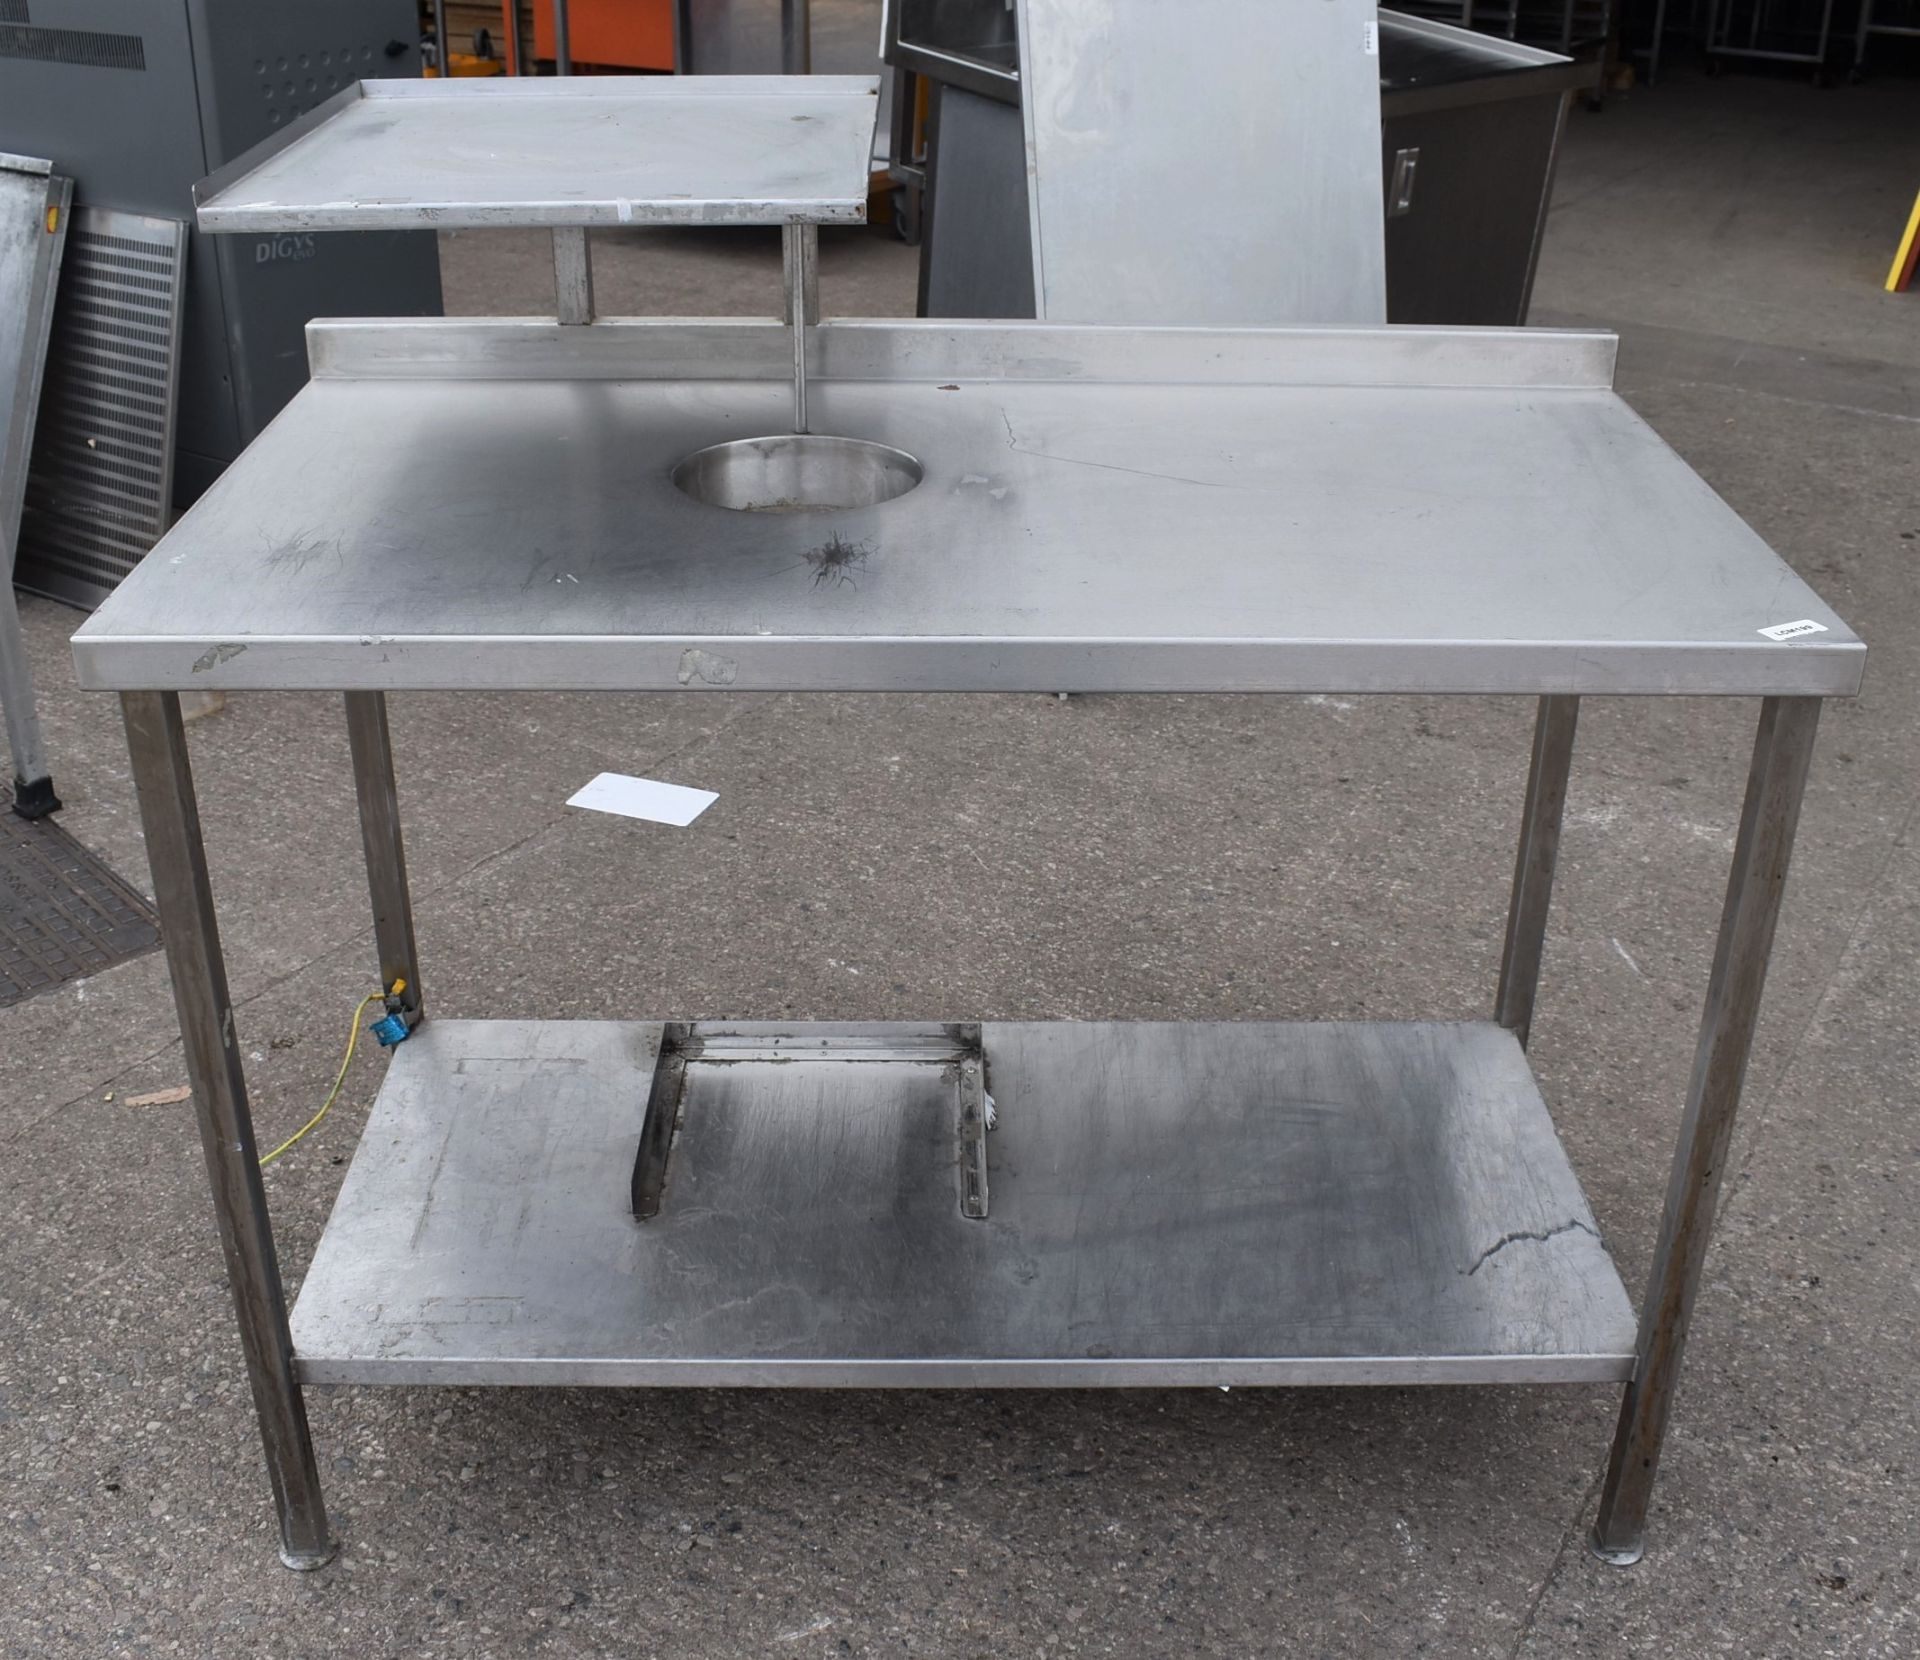 1 x Stainless Steel Workstation With Label Printer Shelf and Bin Chute - Dimensions: H86 x W120 x